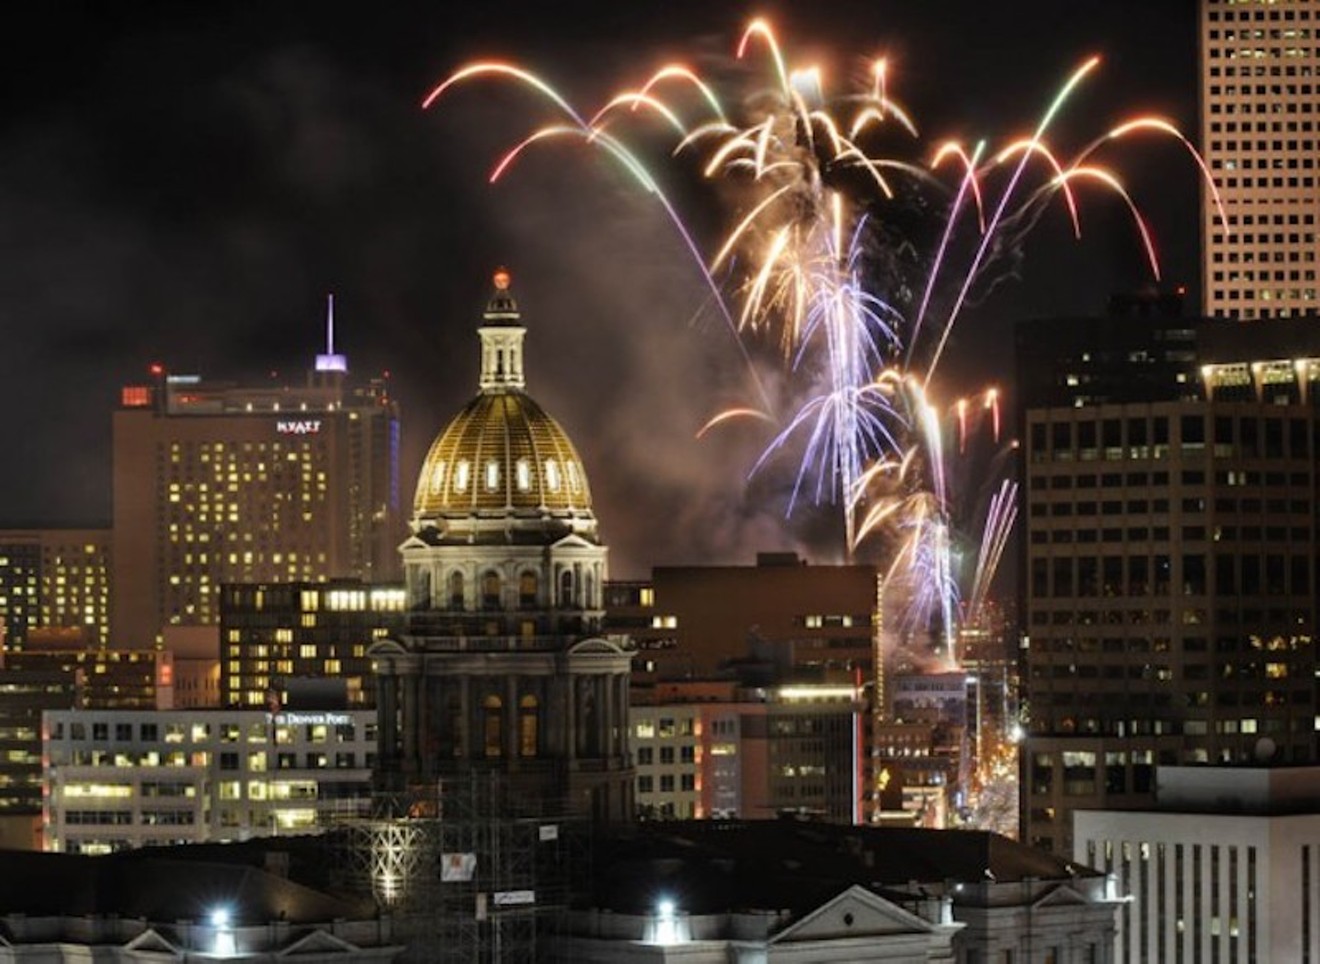 Start off 2018 with a literal bang at a pair of New Year's Eve fireworks displays on the 16th Street Mall.